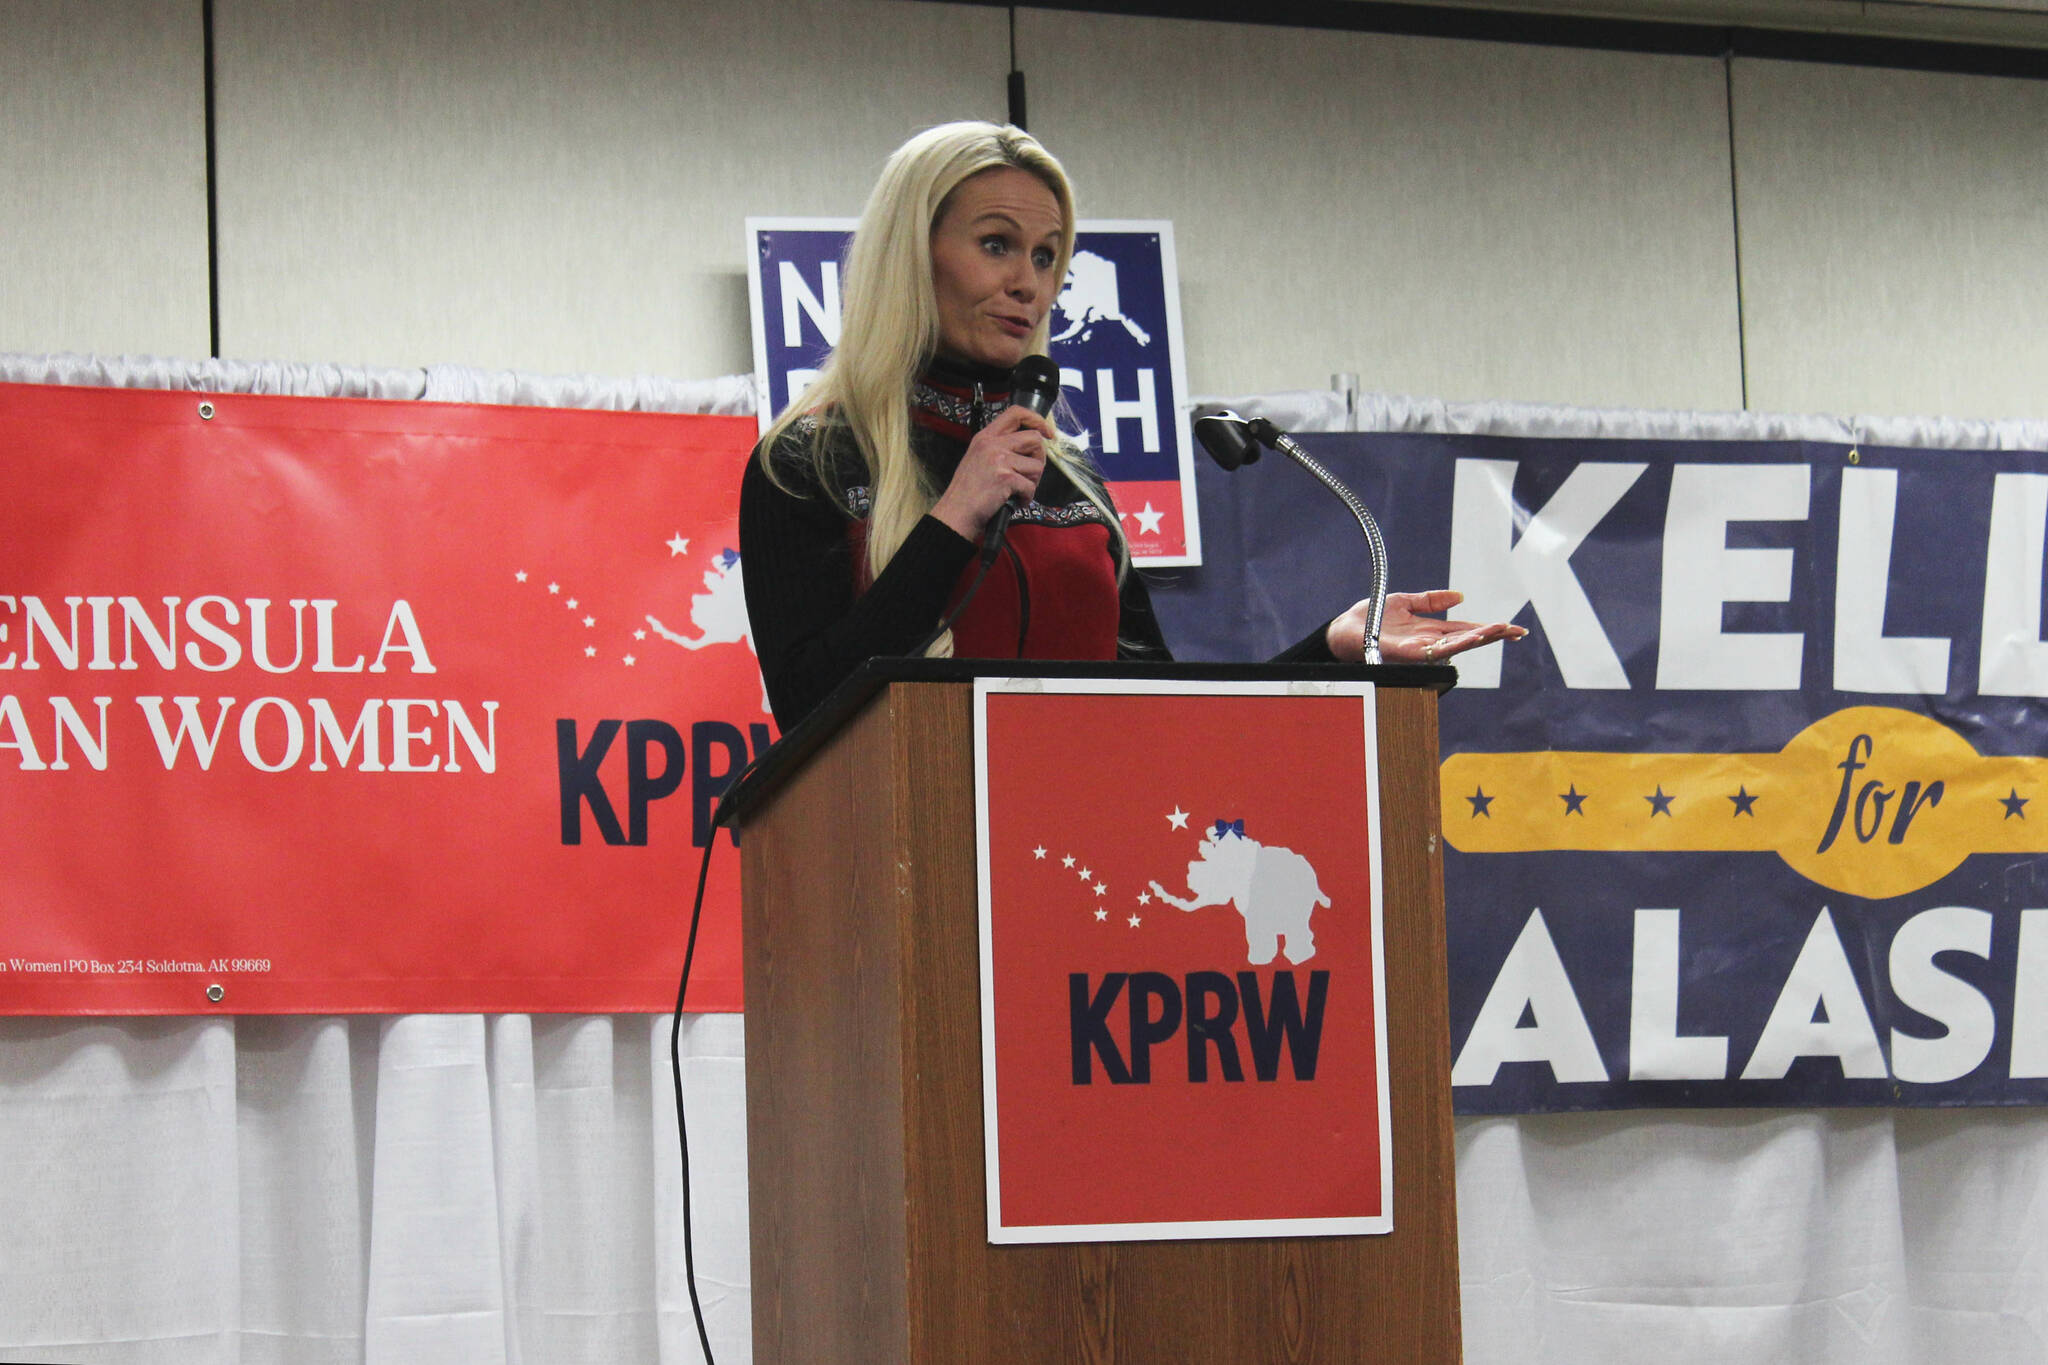 U.S. Senate candidate Kelly Tshibaka speaks at a “Get Out the Vote” rally hosted by the Kenai Peninsula Republican Women at the Soldotna Regional Sports Complex on Tuesday, Oct. 18, 2022, in Soldotna, Alaska. (Ashlyn O’Hara/Peninsula Clarion)